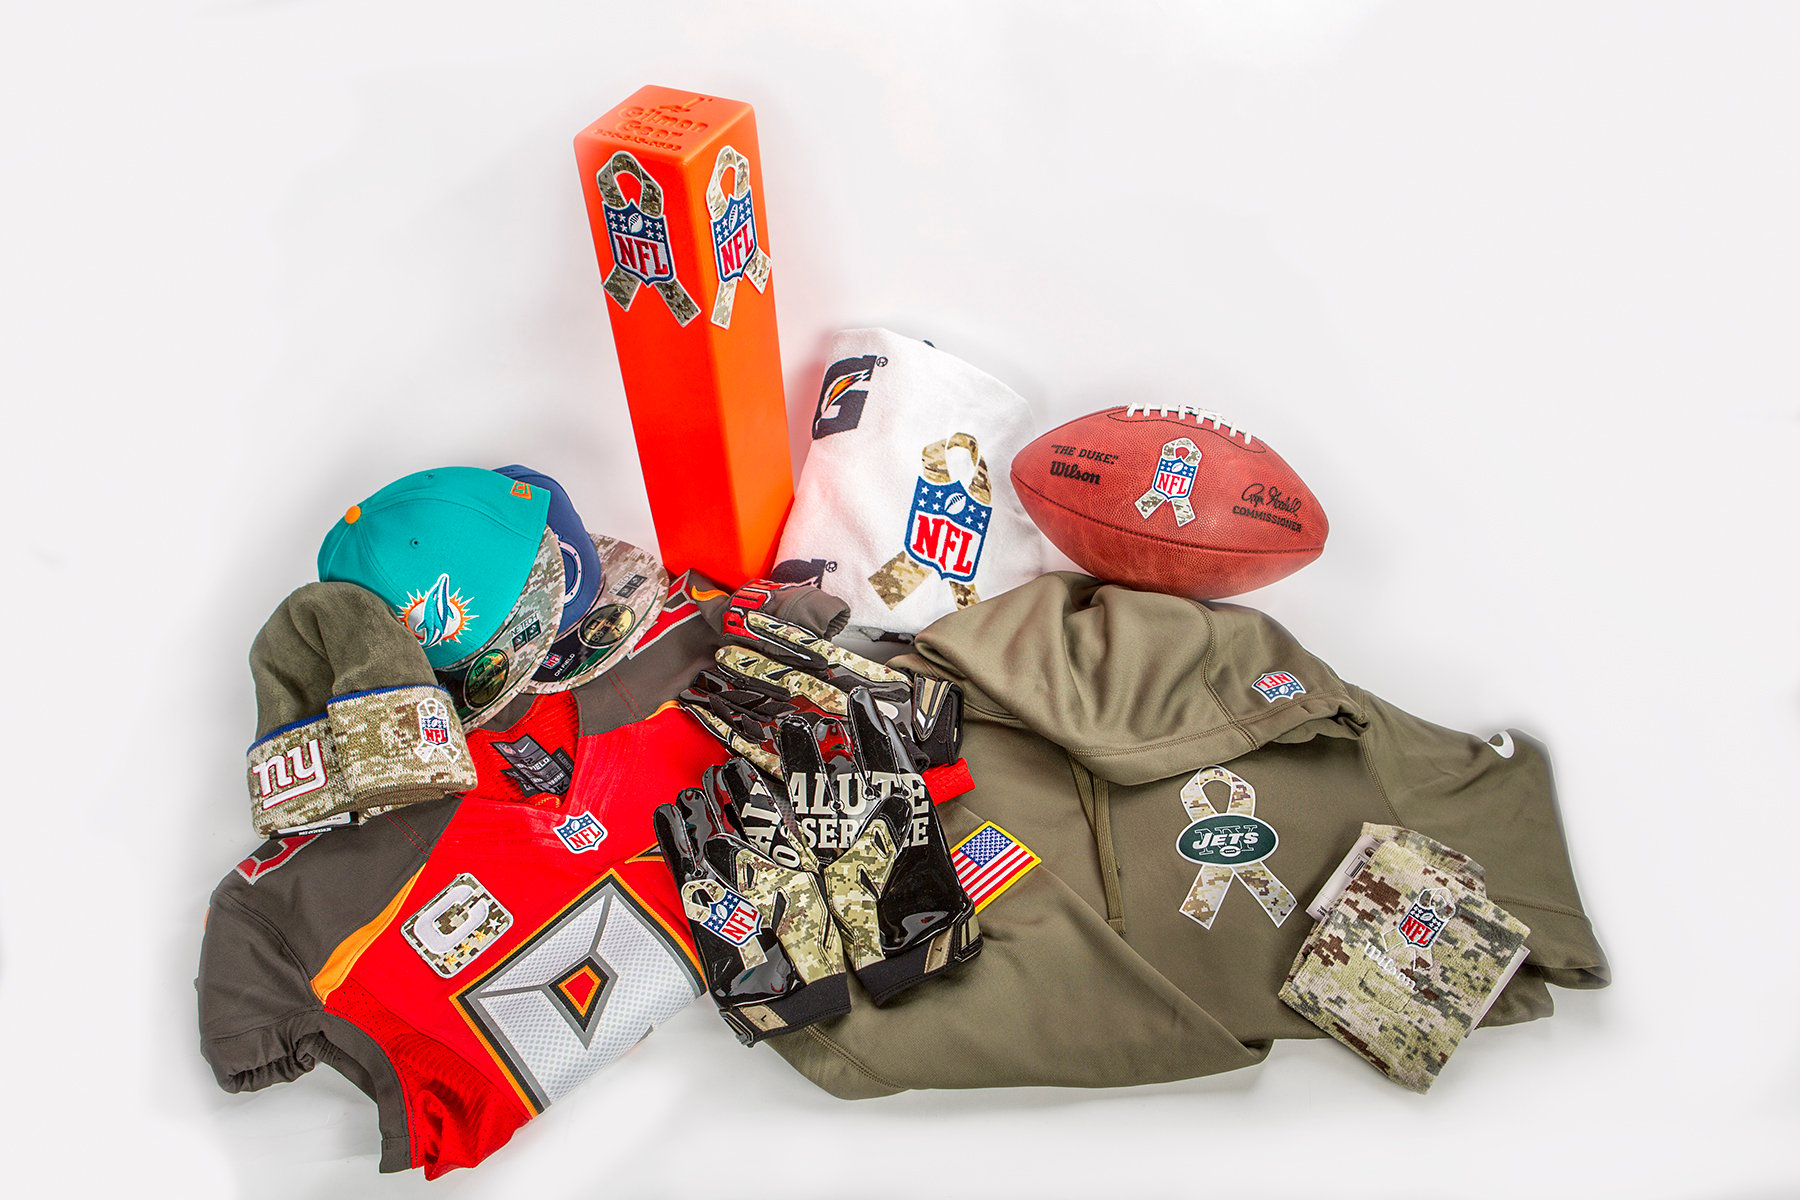 nfl salute to service merchandise